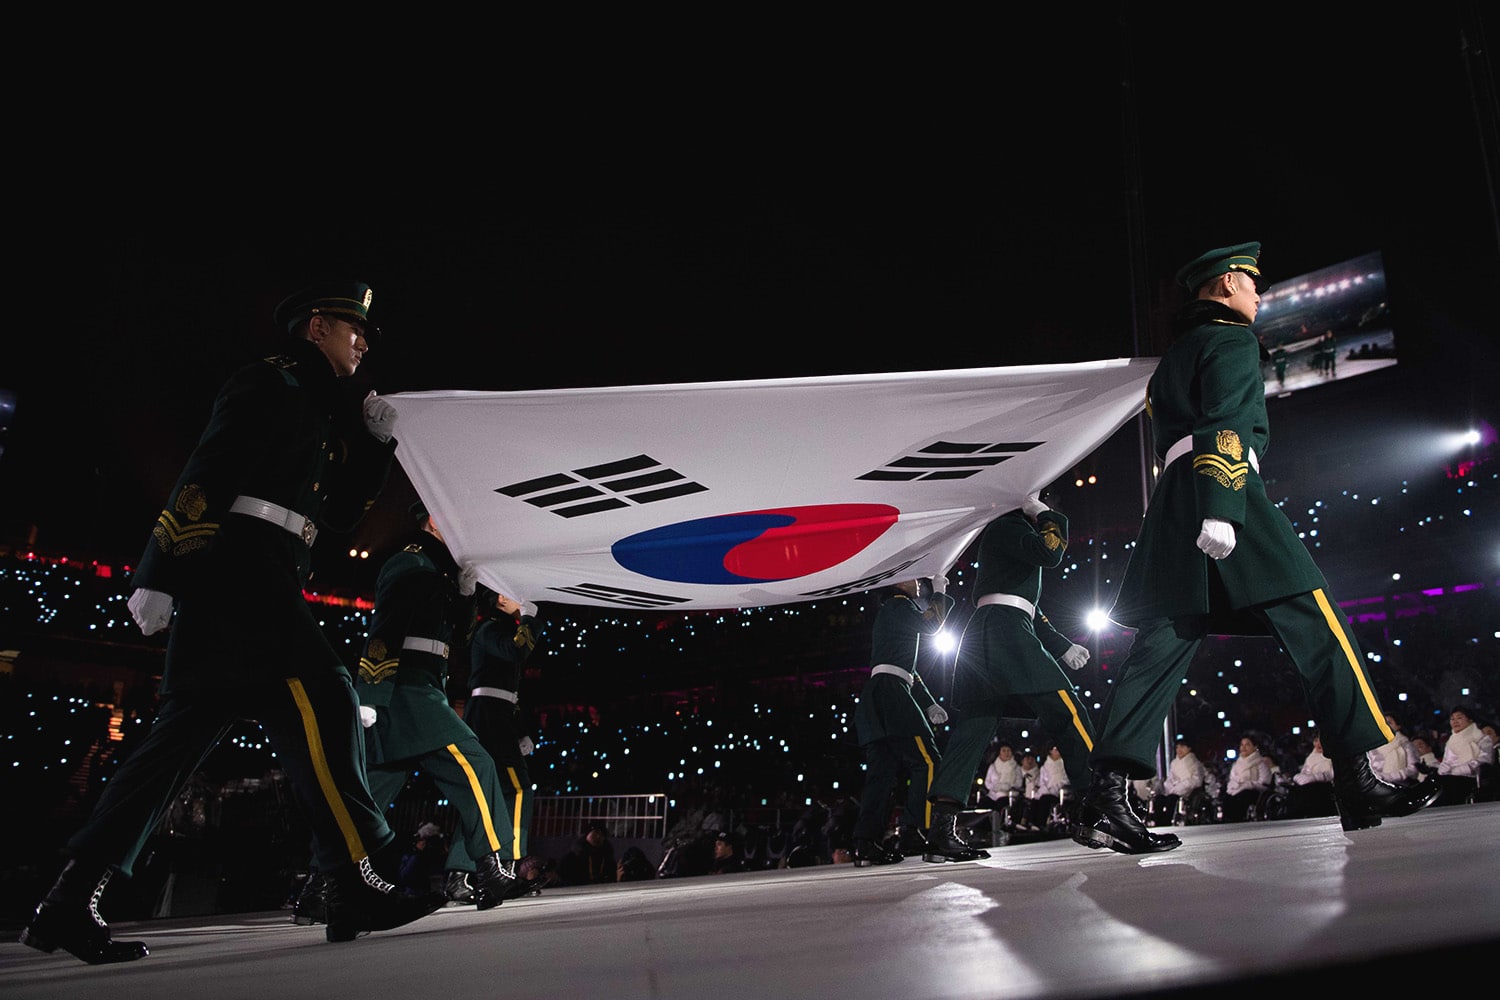 Flag bearers enter with the South Korean flag during the opening ceremony for the Pyeongchang 2018 Winter Games